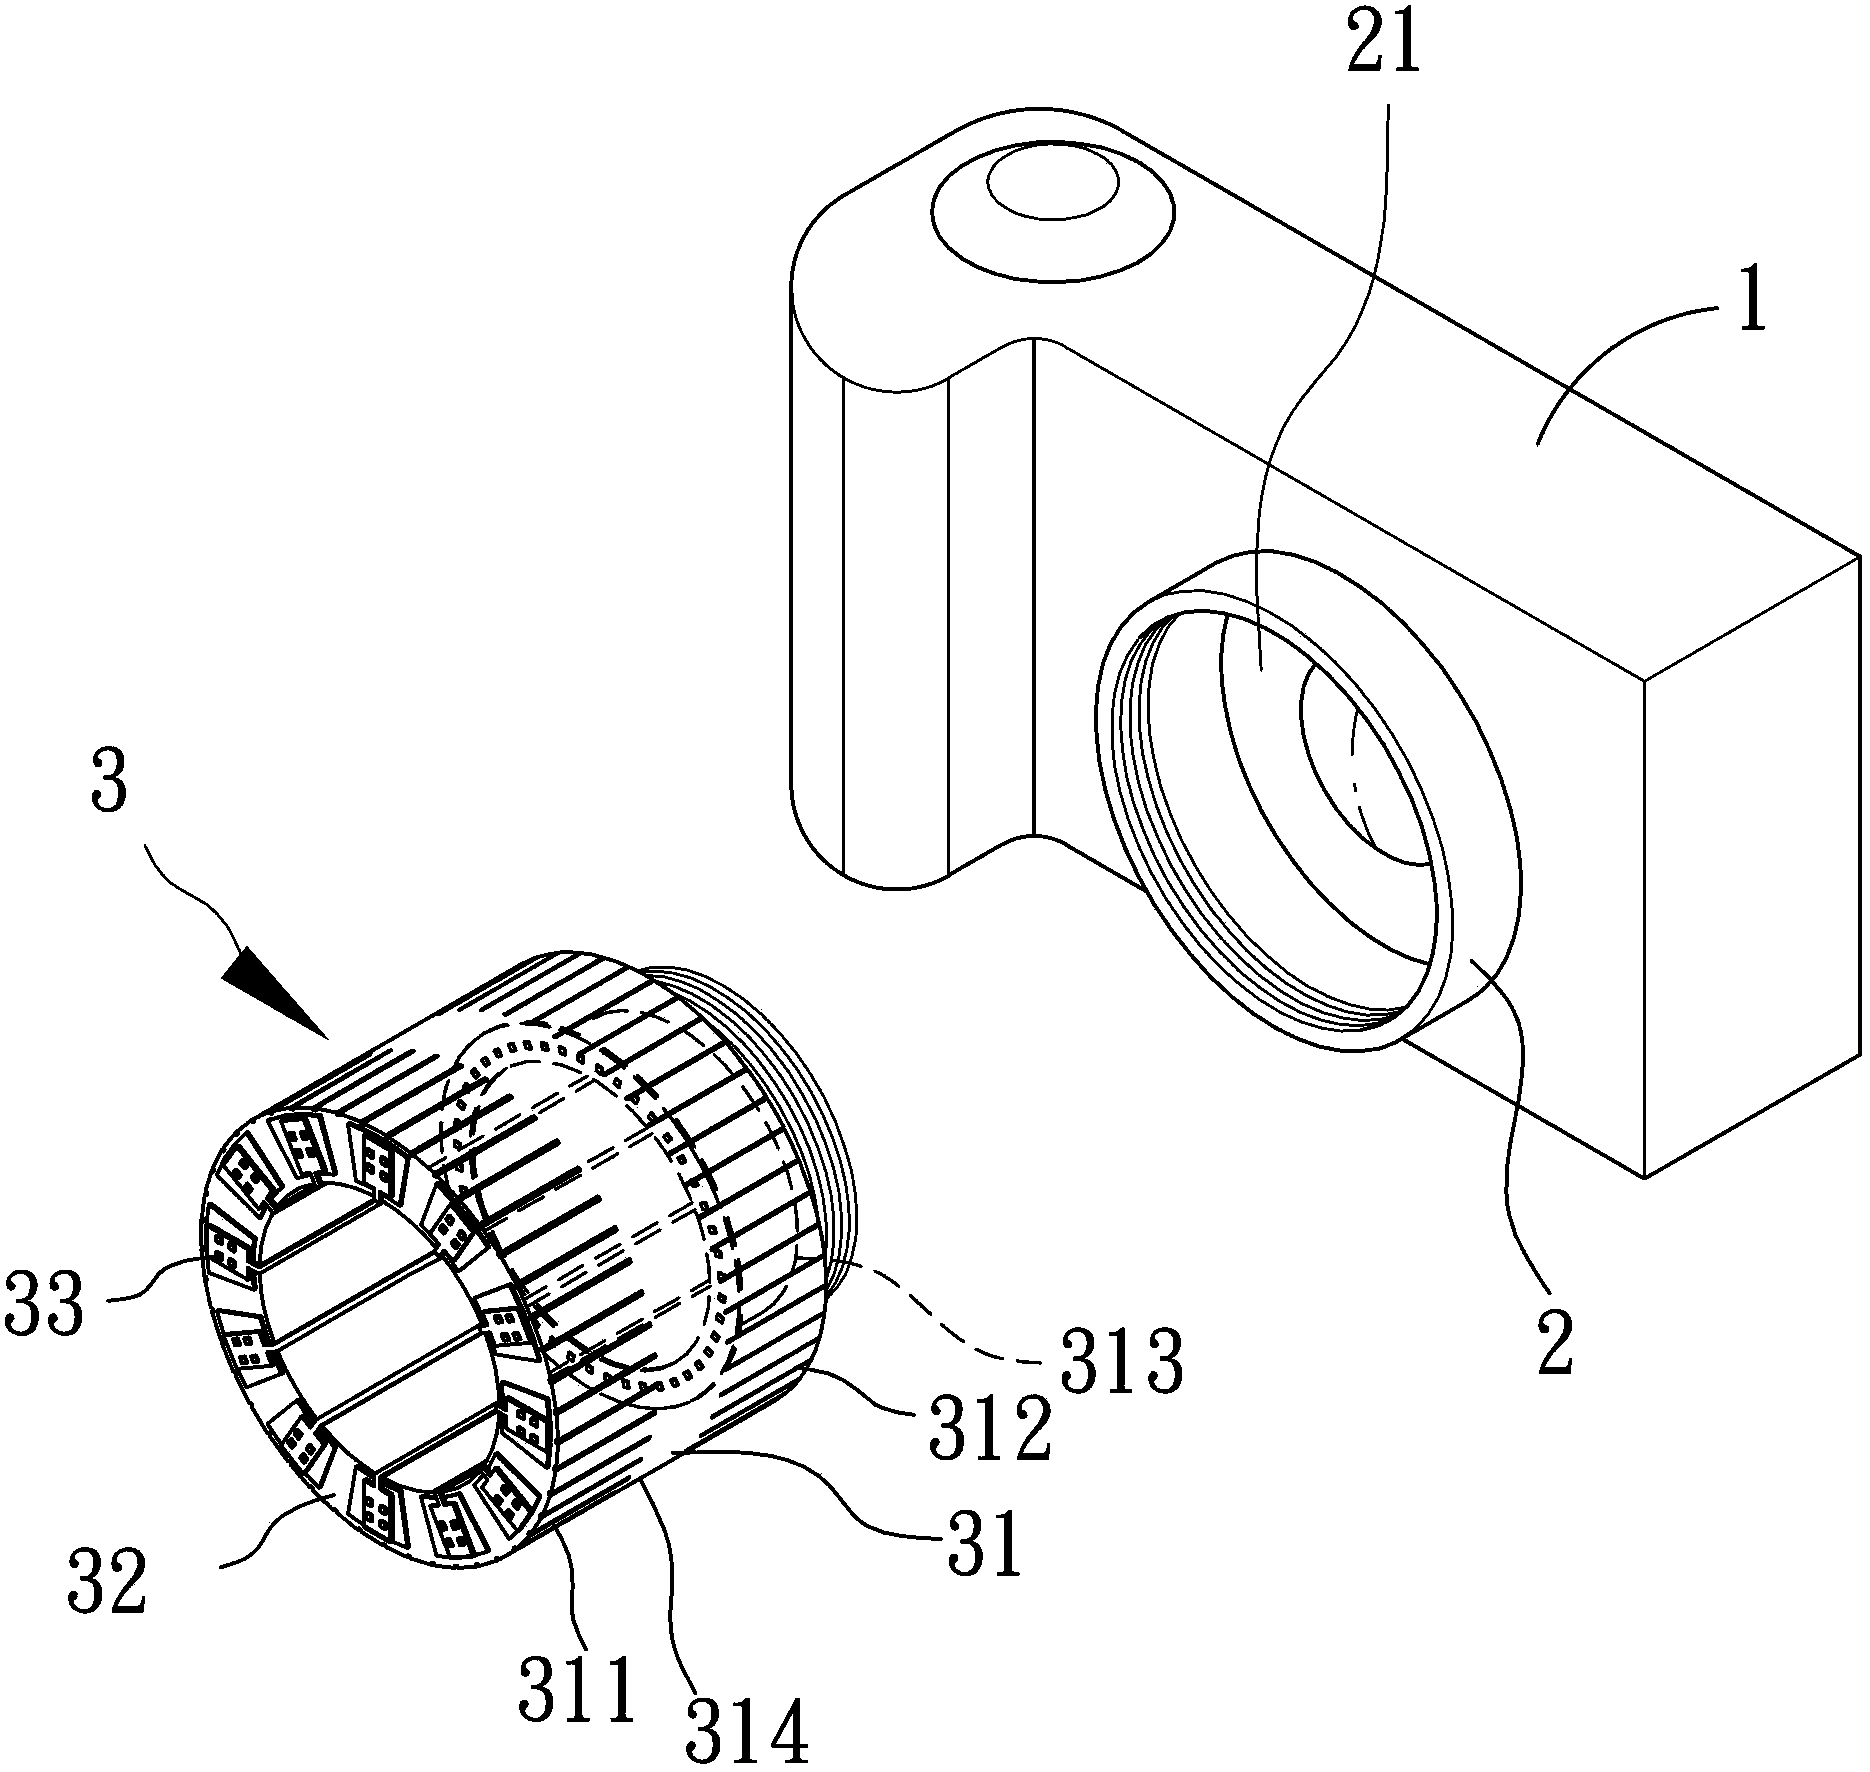 Microspur light supplement module with flexible circuit boards